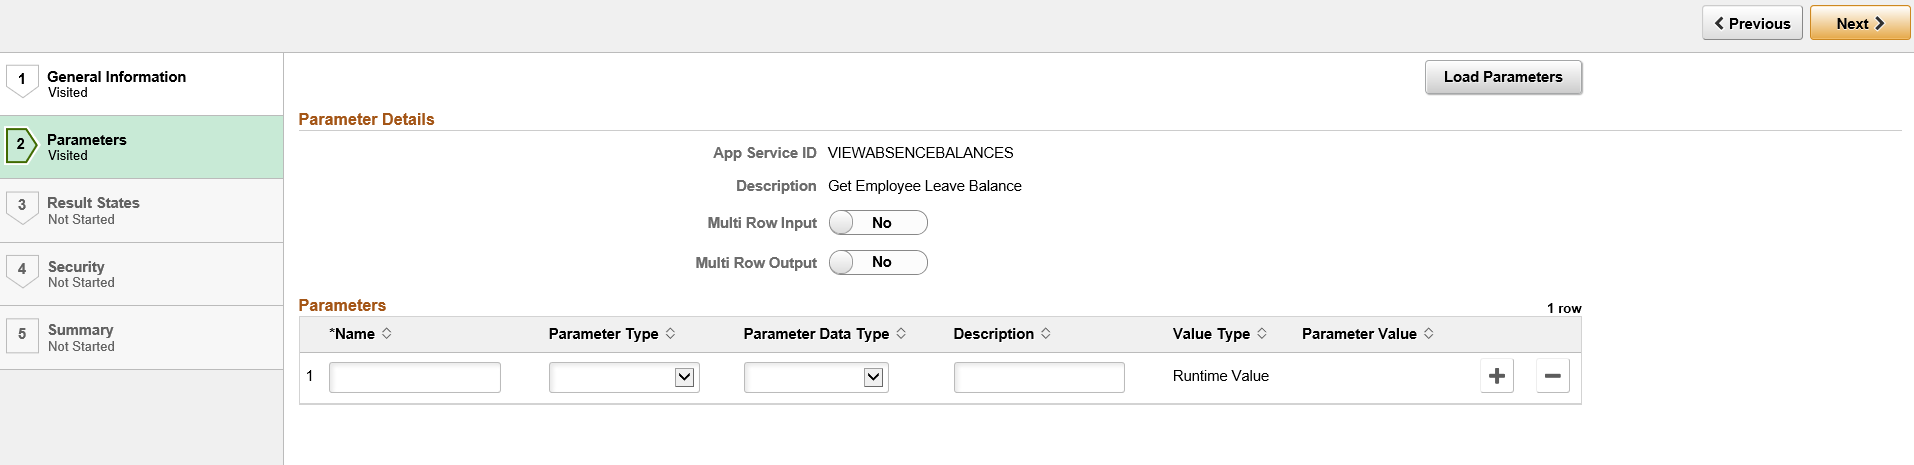 Step 2 - Application Service Registration Wizard - Parameters Page